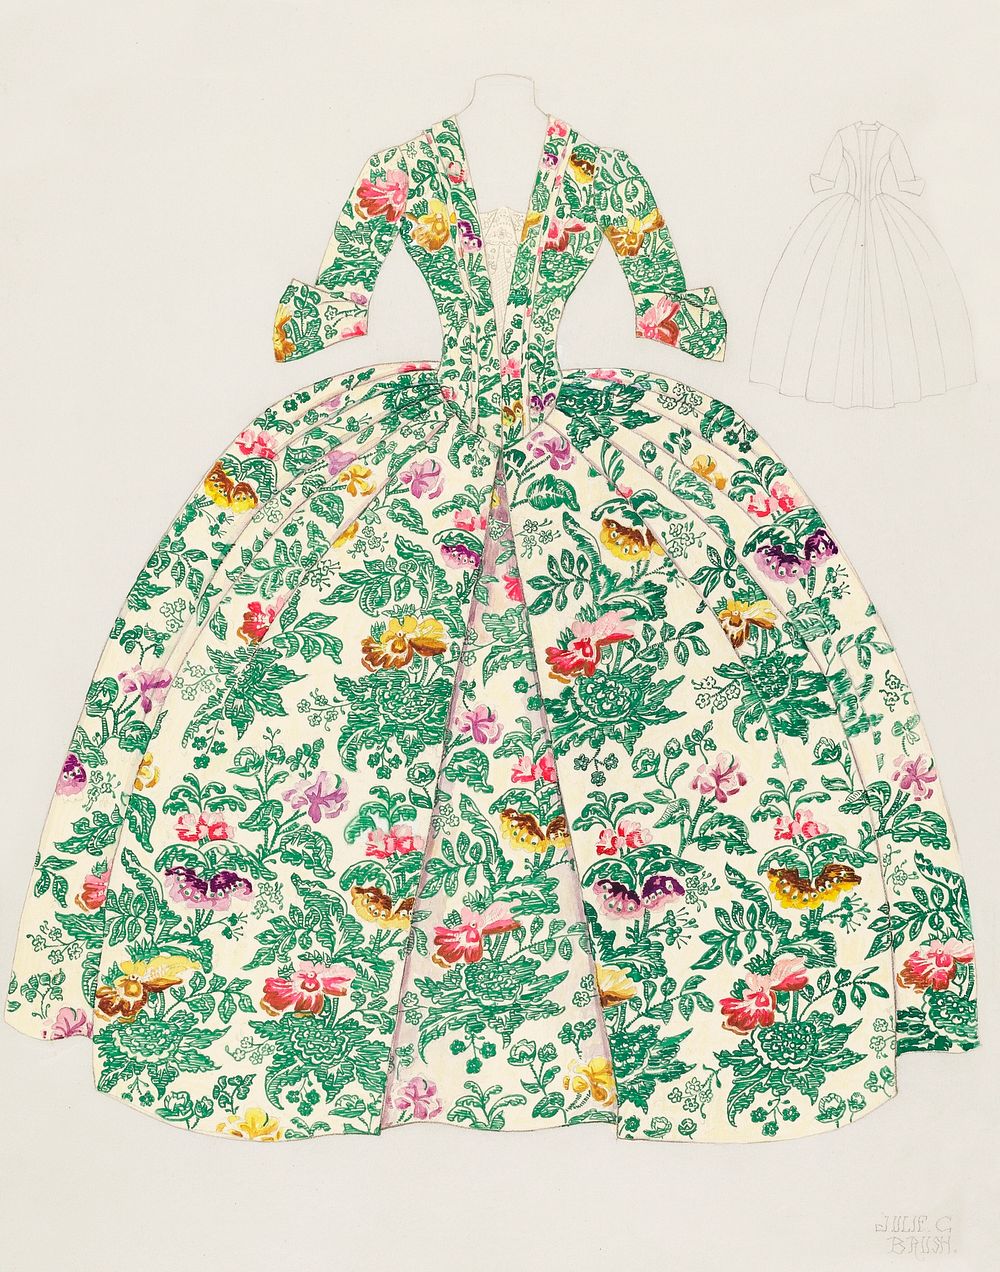 Dress (c. 1936) by Julie C. Brush. Original from The National Gallery of Art. Digitally enhanced by rawpixel.